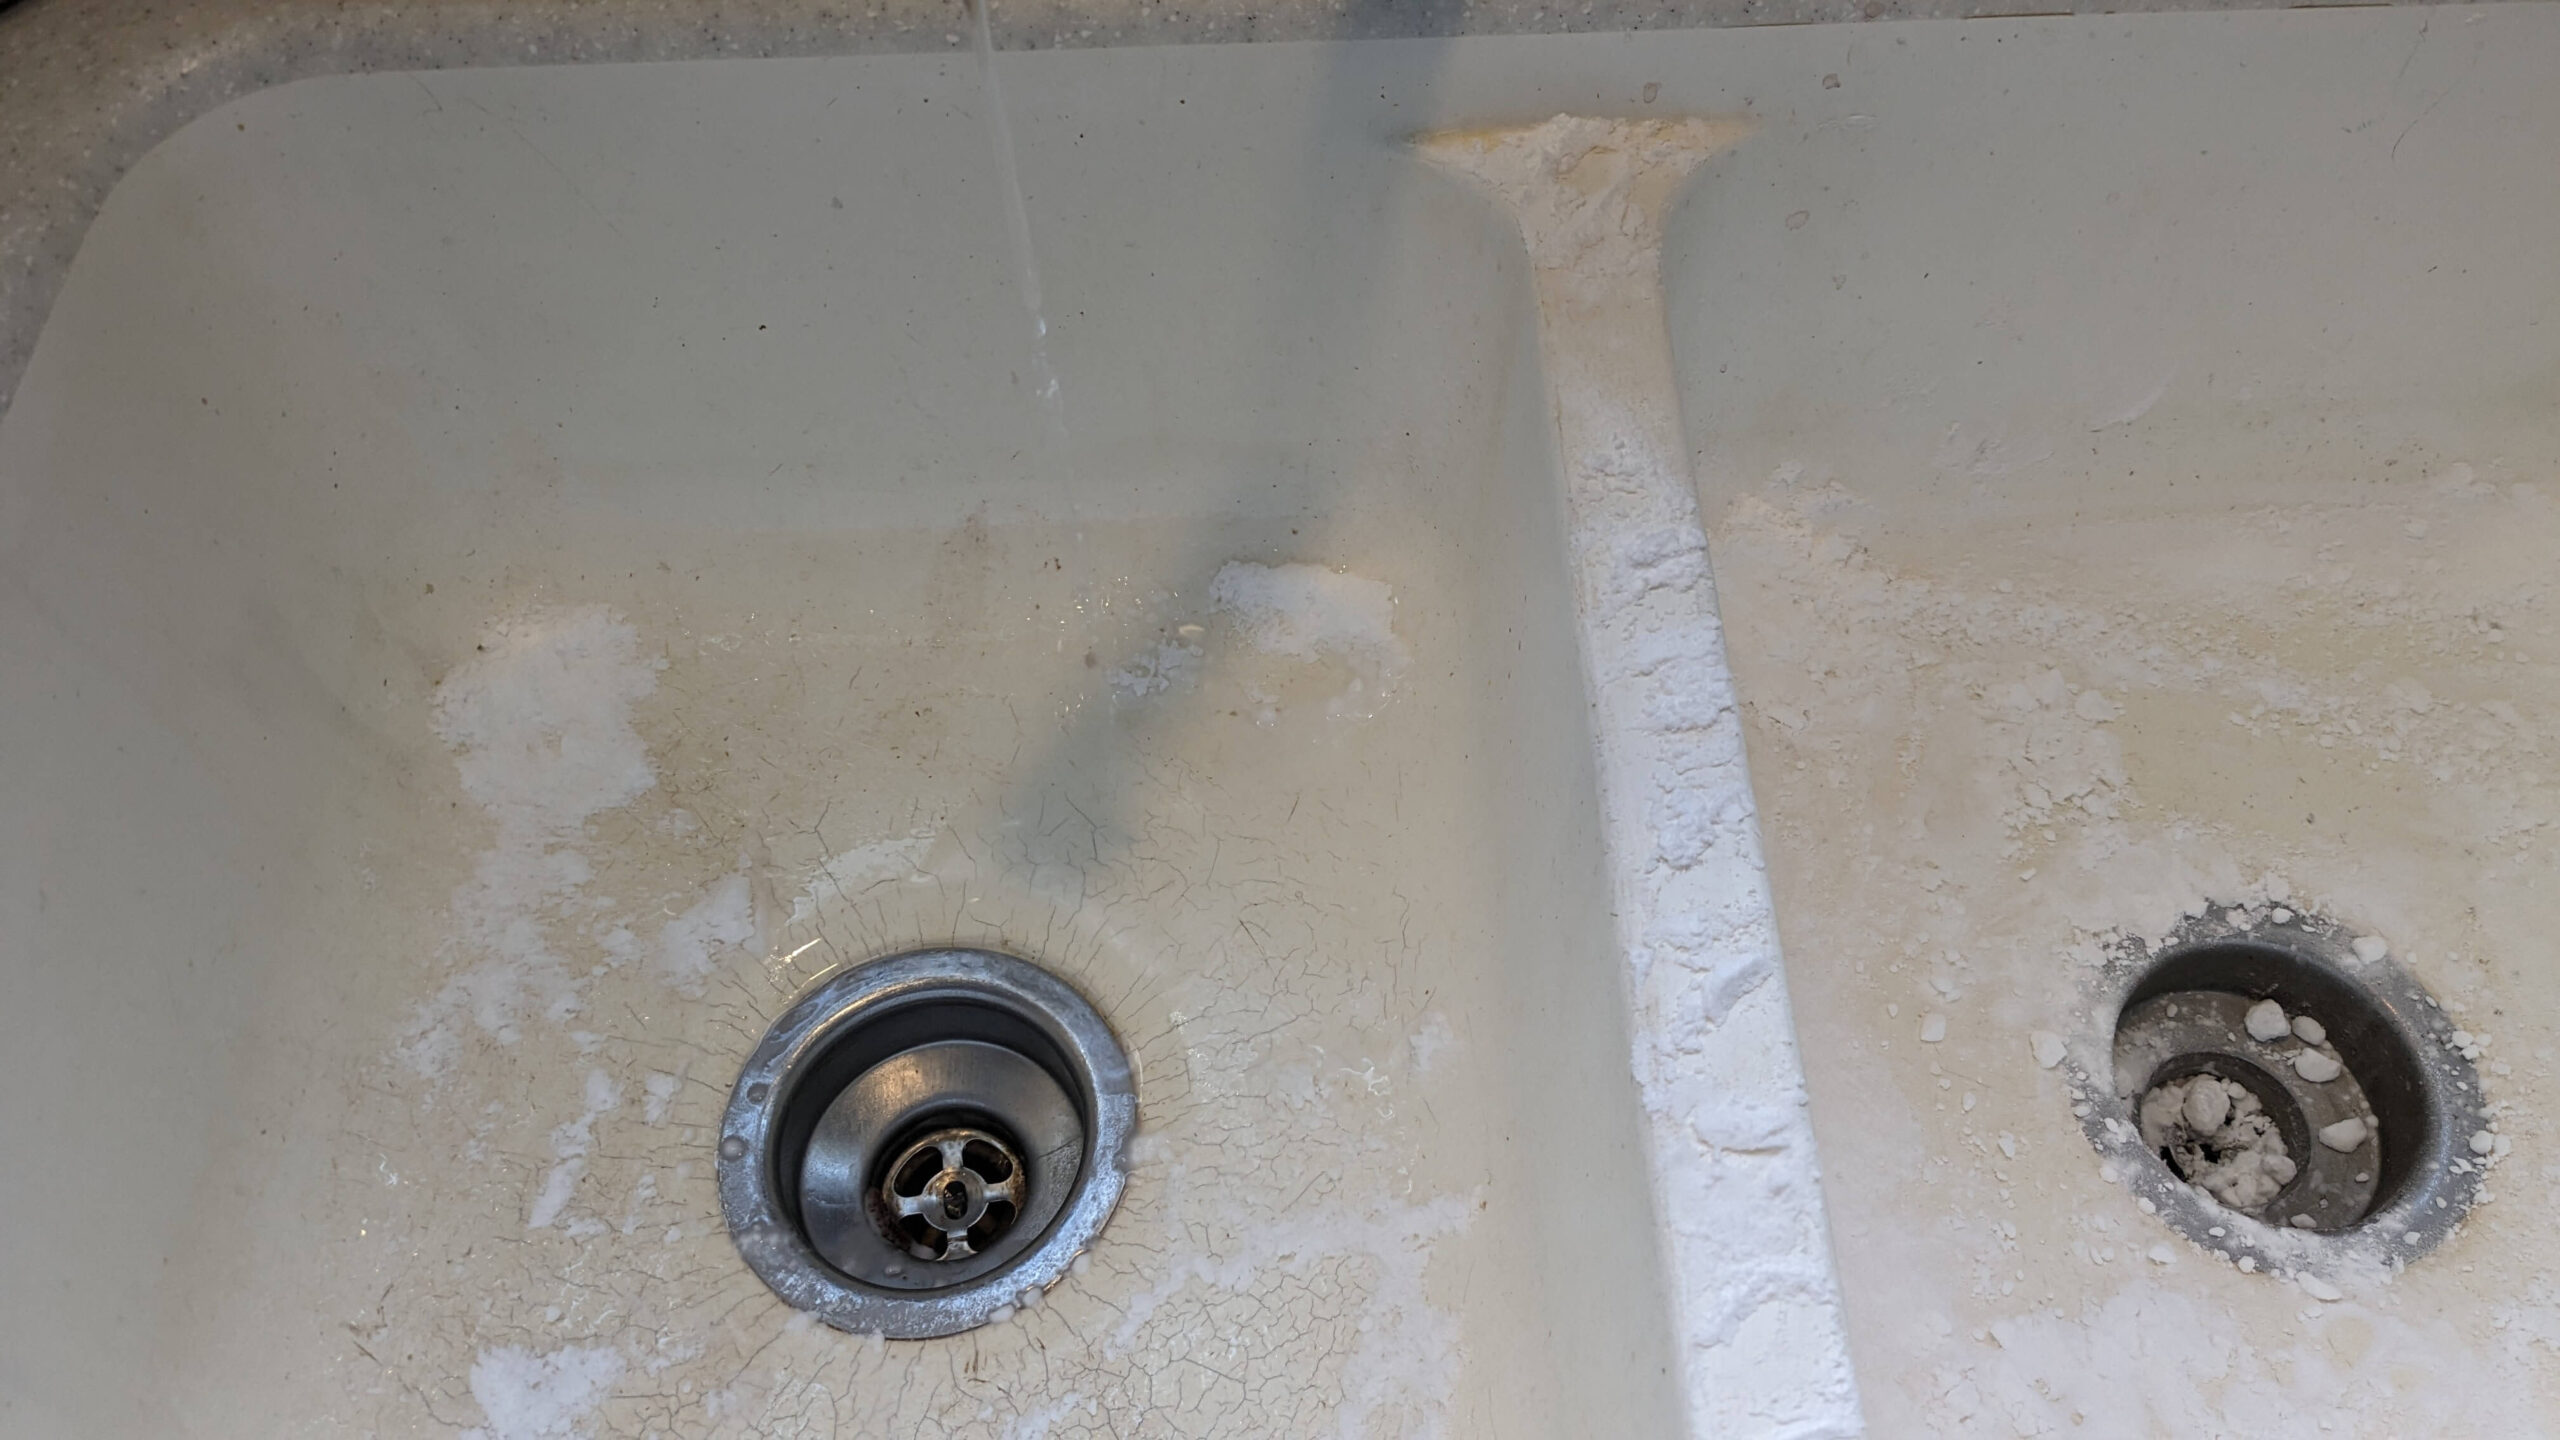 water dripping into a sink that has baking powder spread out over it